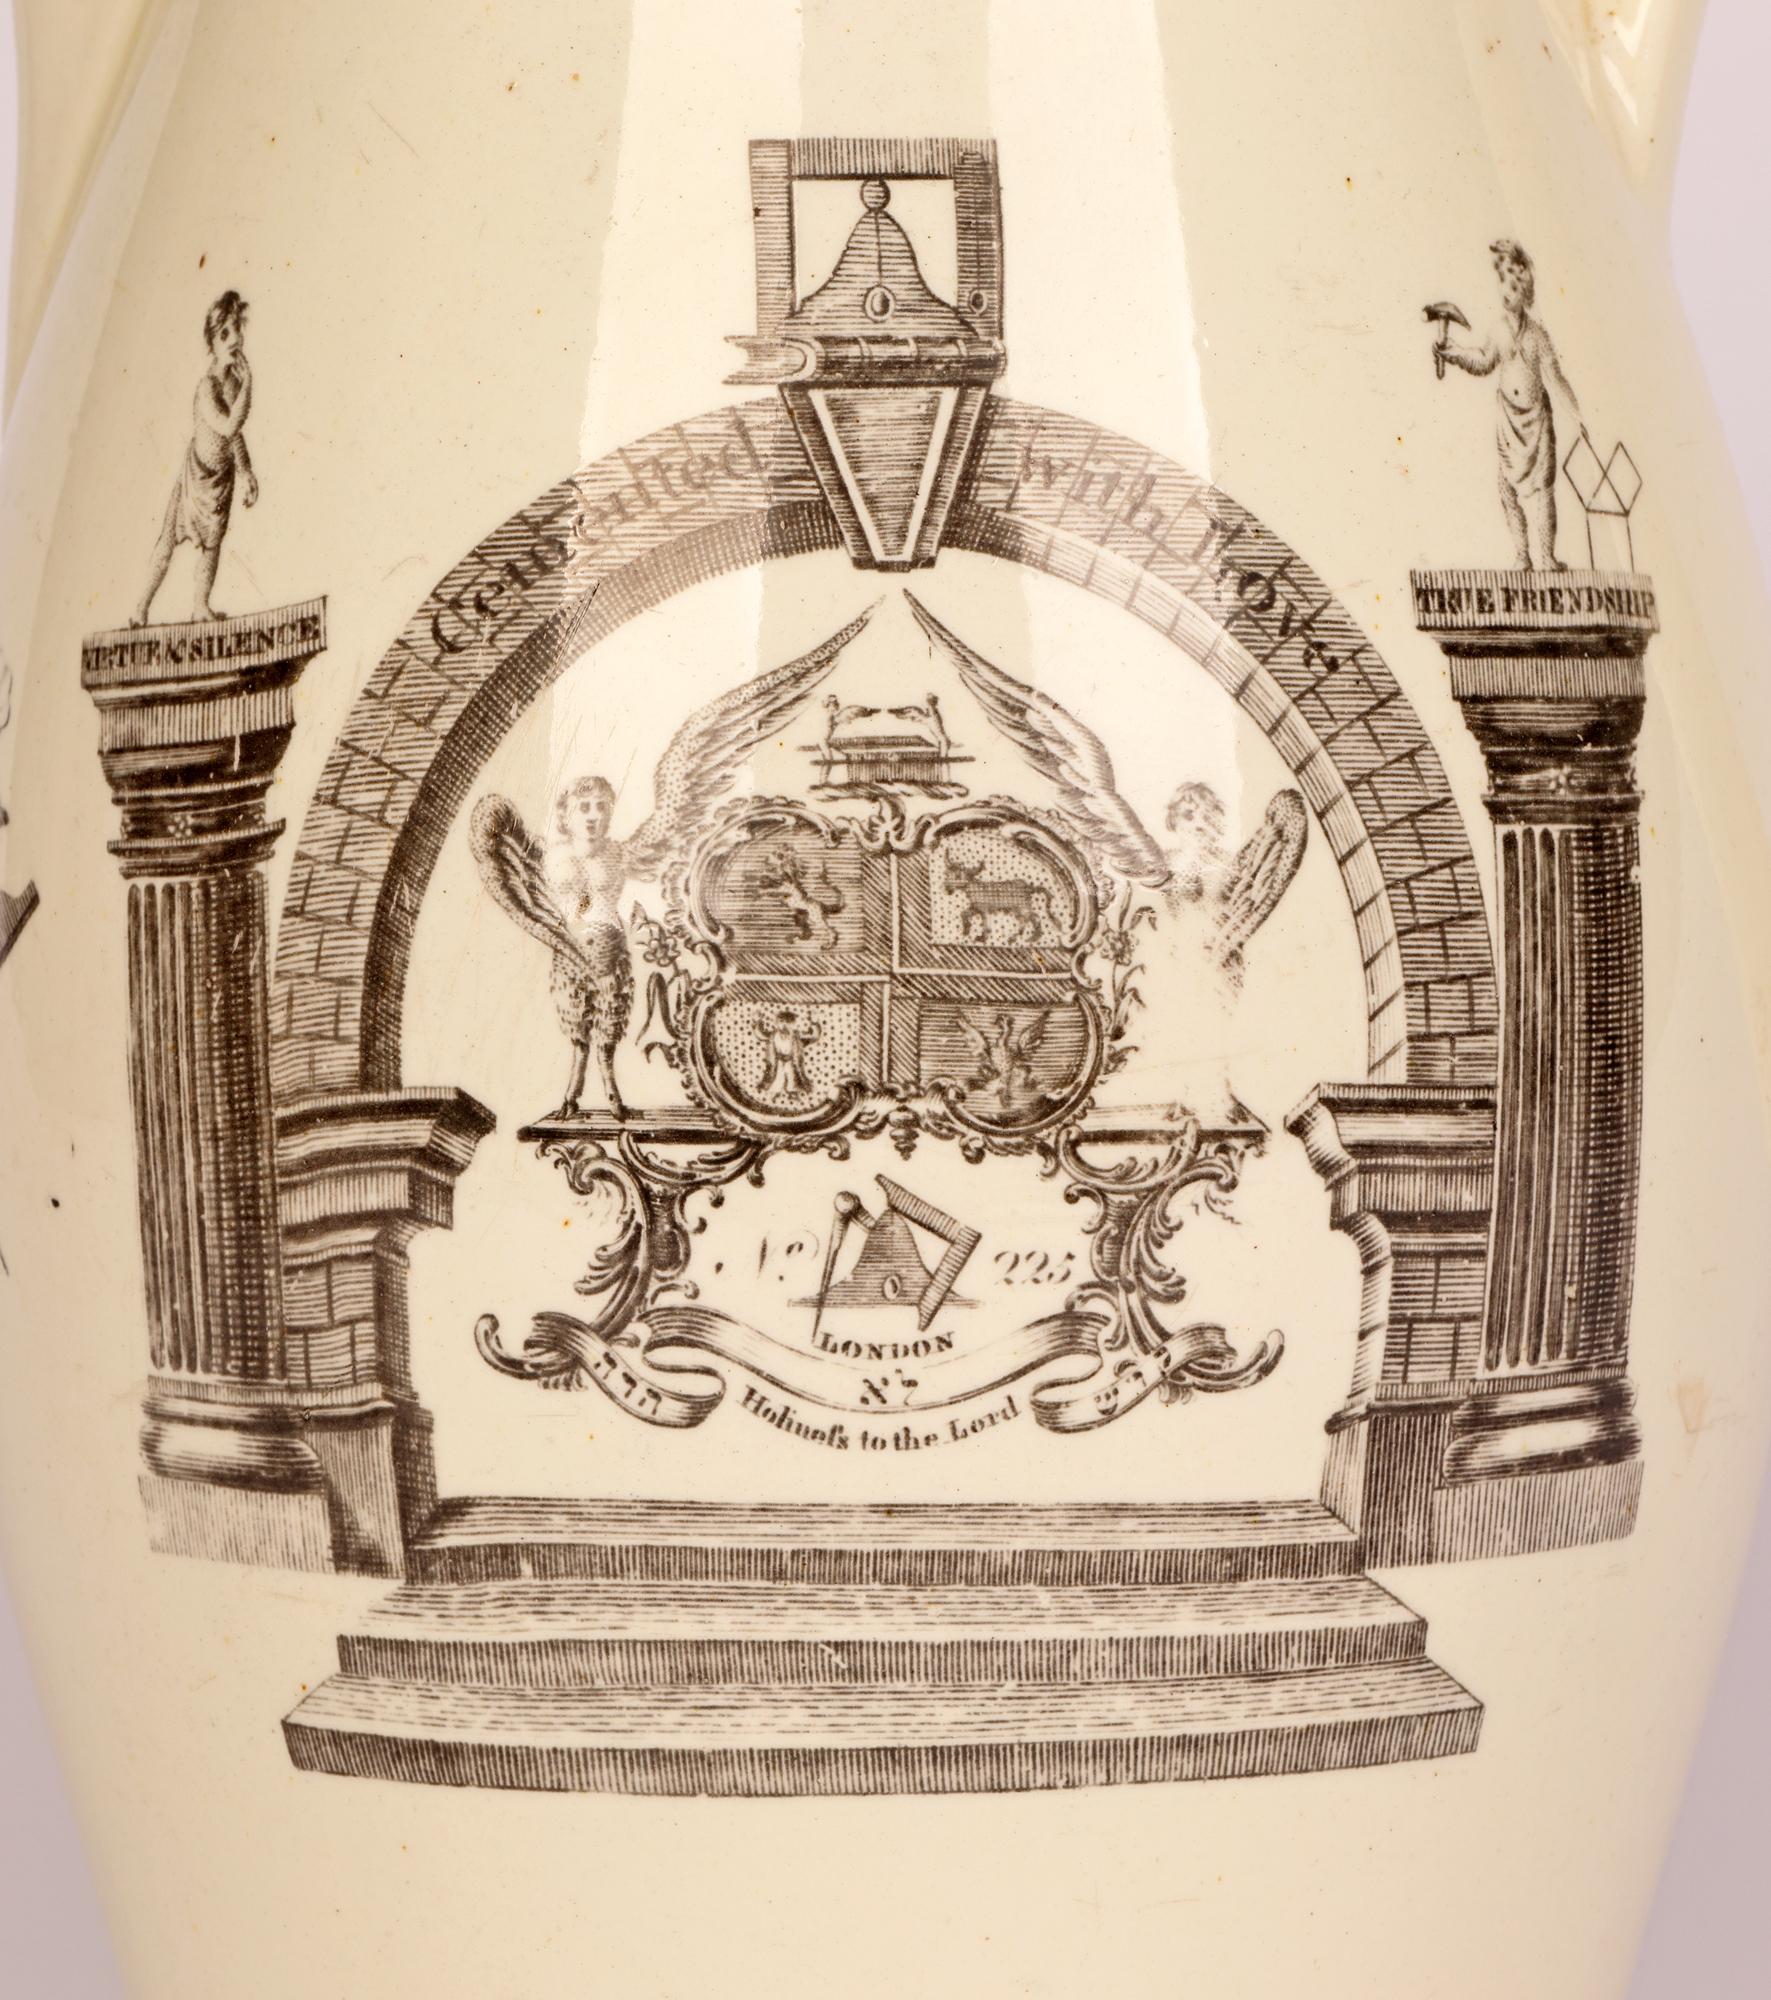 A rare large creamware pottery jug Masonic printed with the London arms of the Antients or the Athol Grand Lodge attributed to Sadler and Green and dating from the latter 18th century. The lightly potted jug is black printed to either side and below